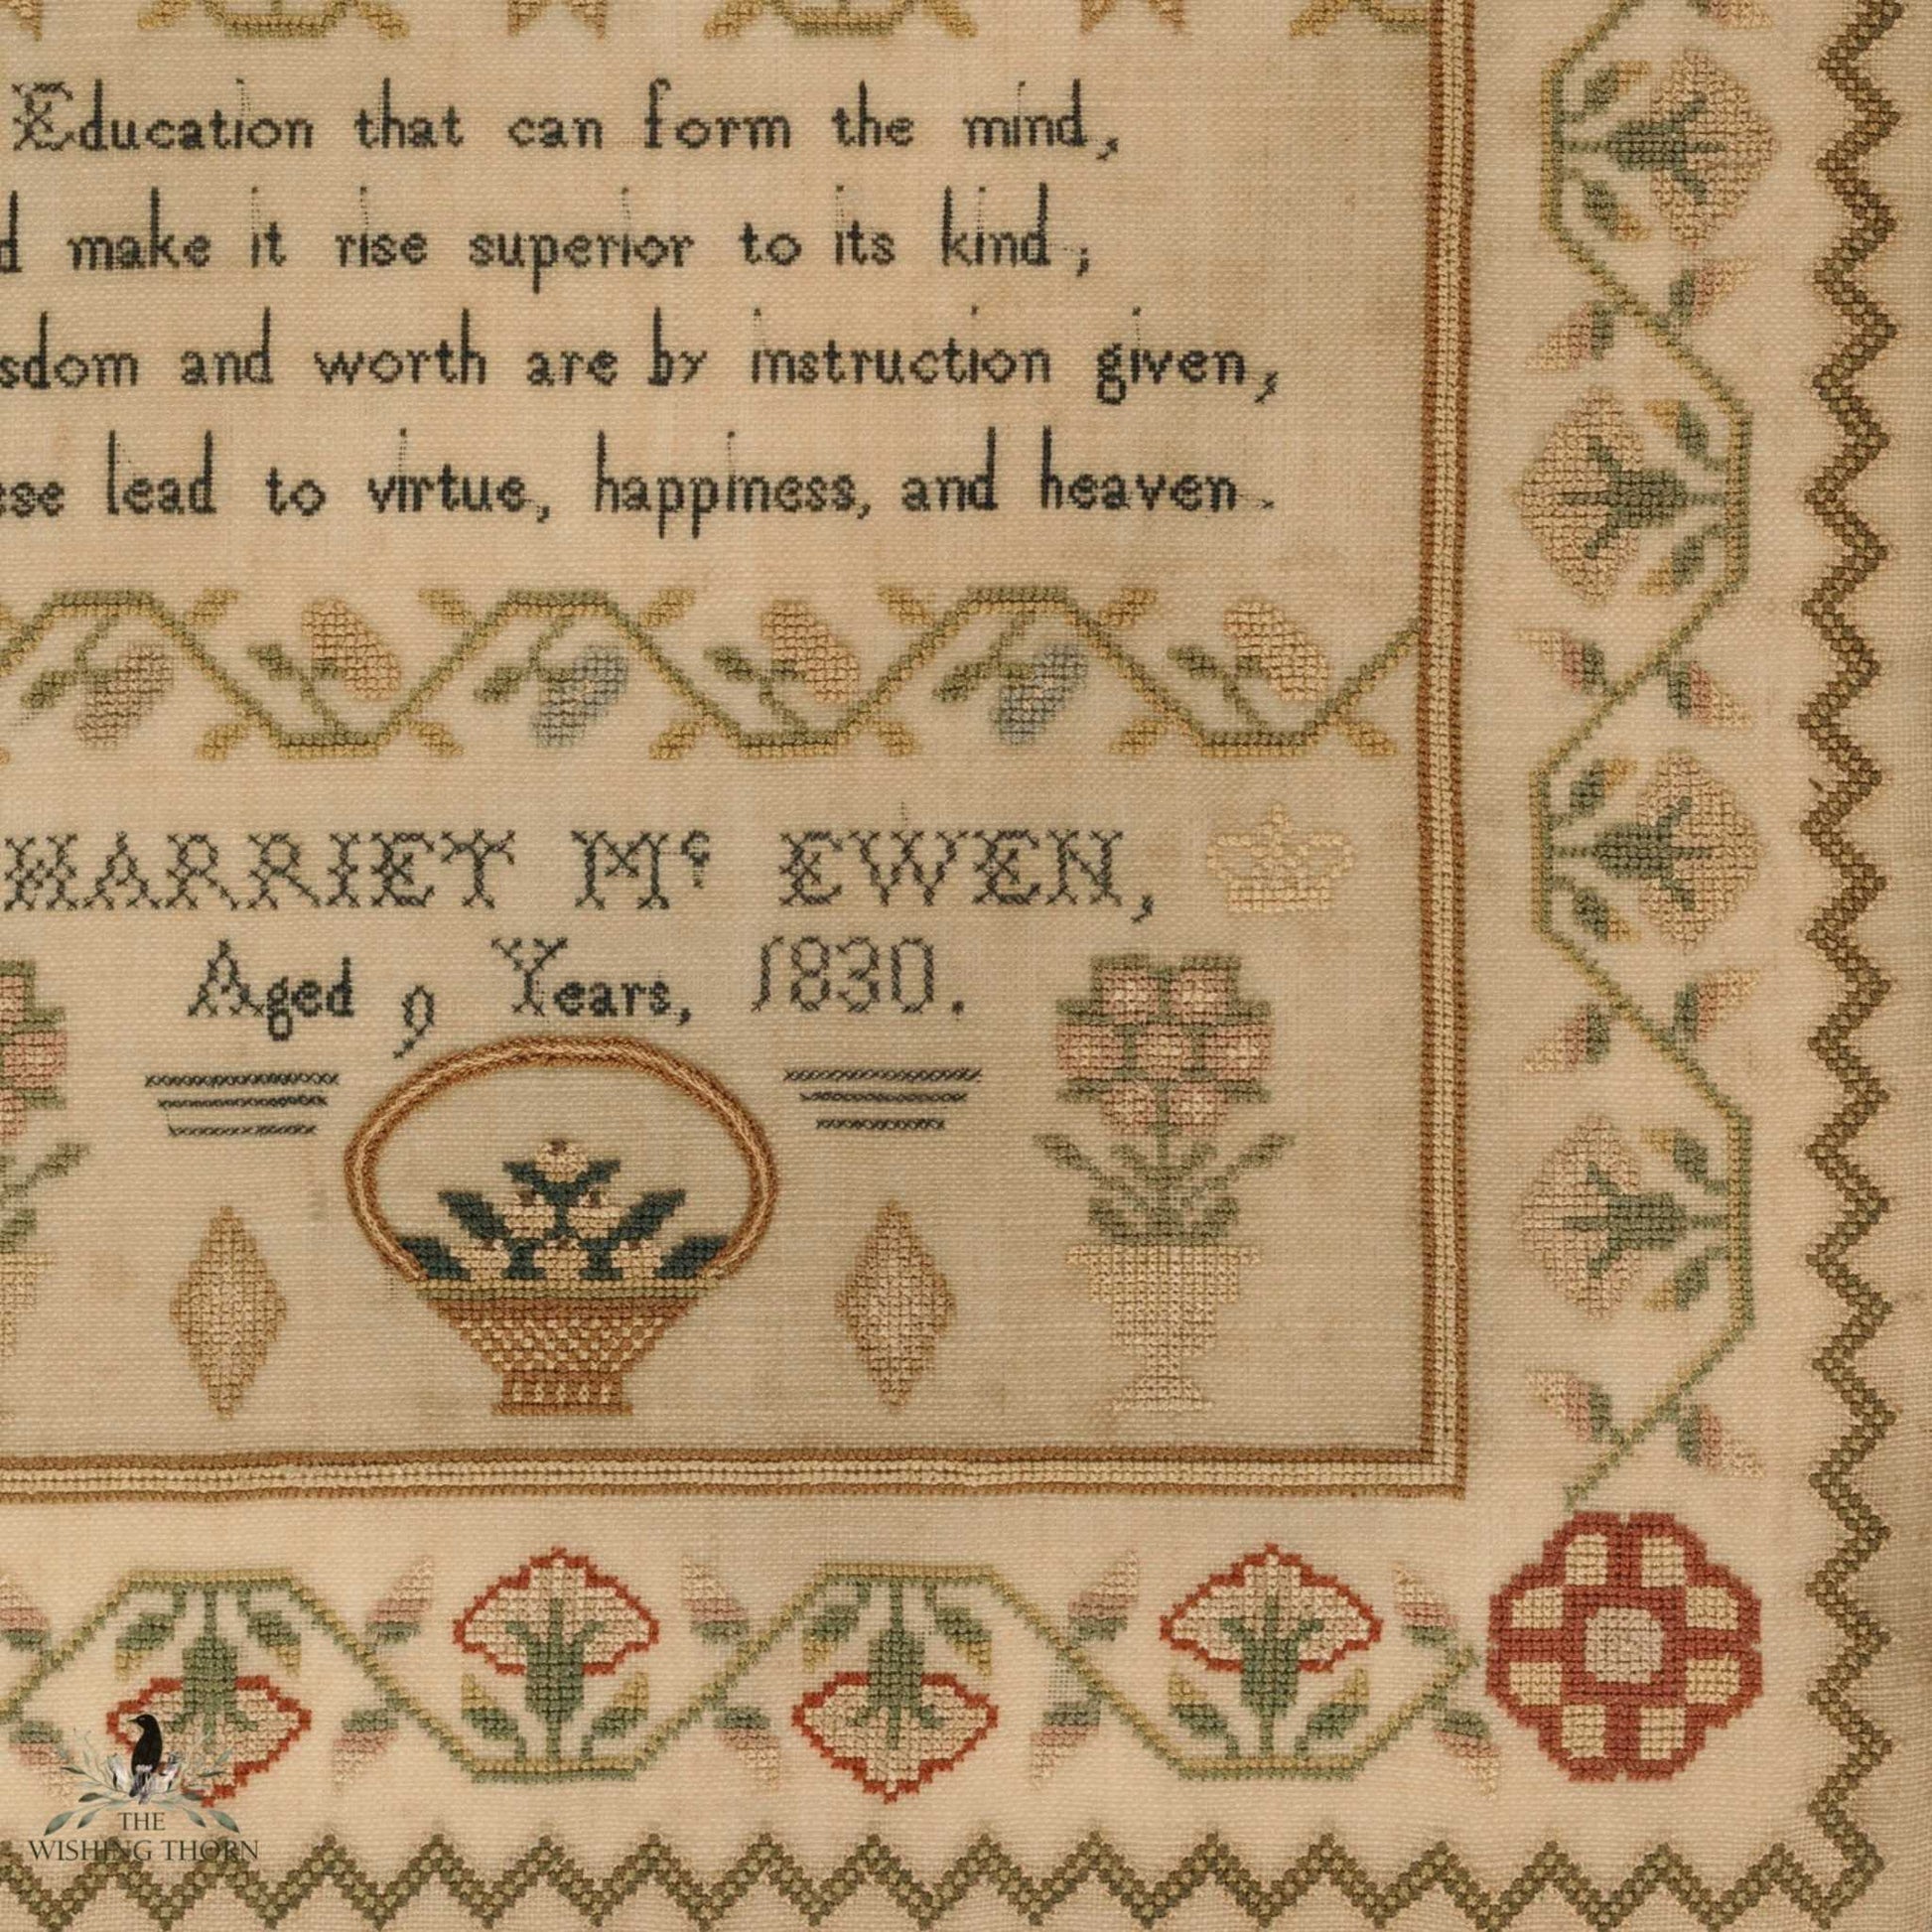 Closeup of the bottom right corner of Harriet Mc Ewen Sampler stitched in 1830